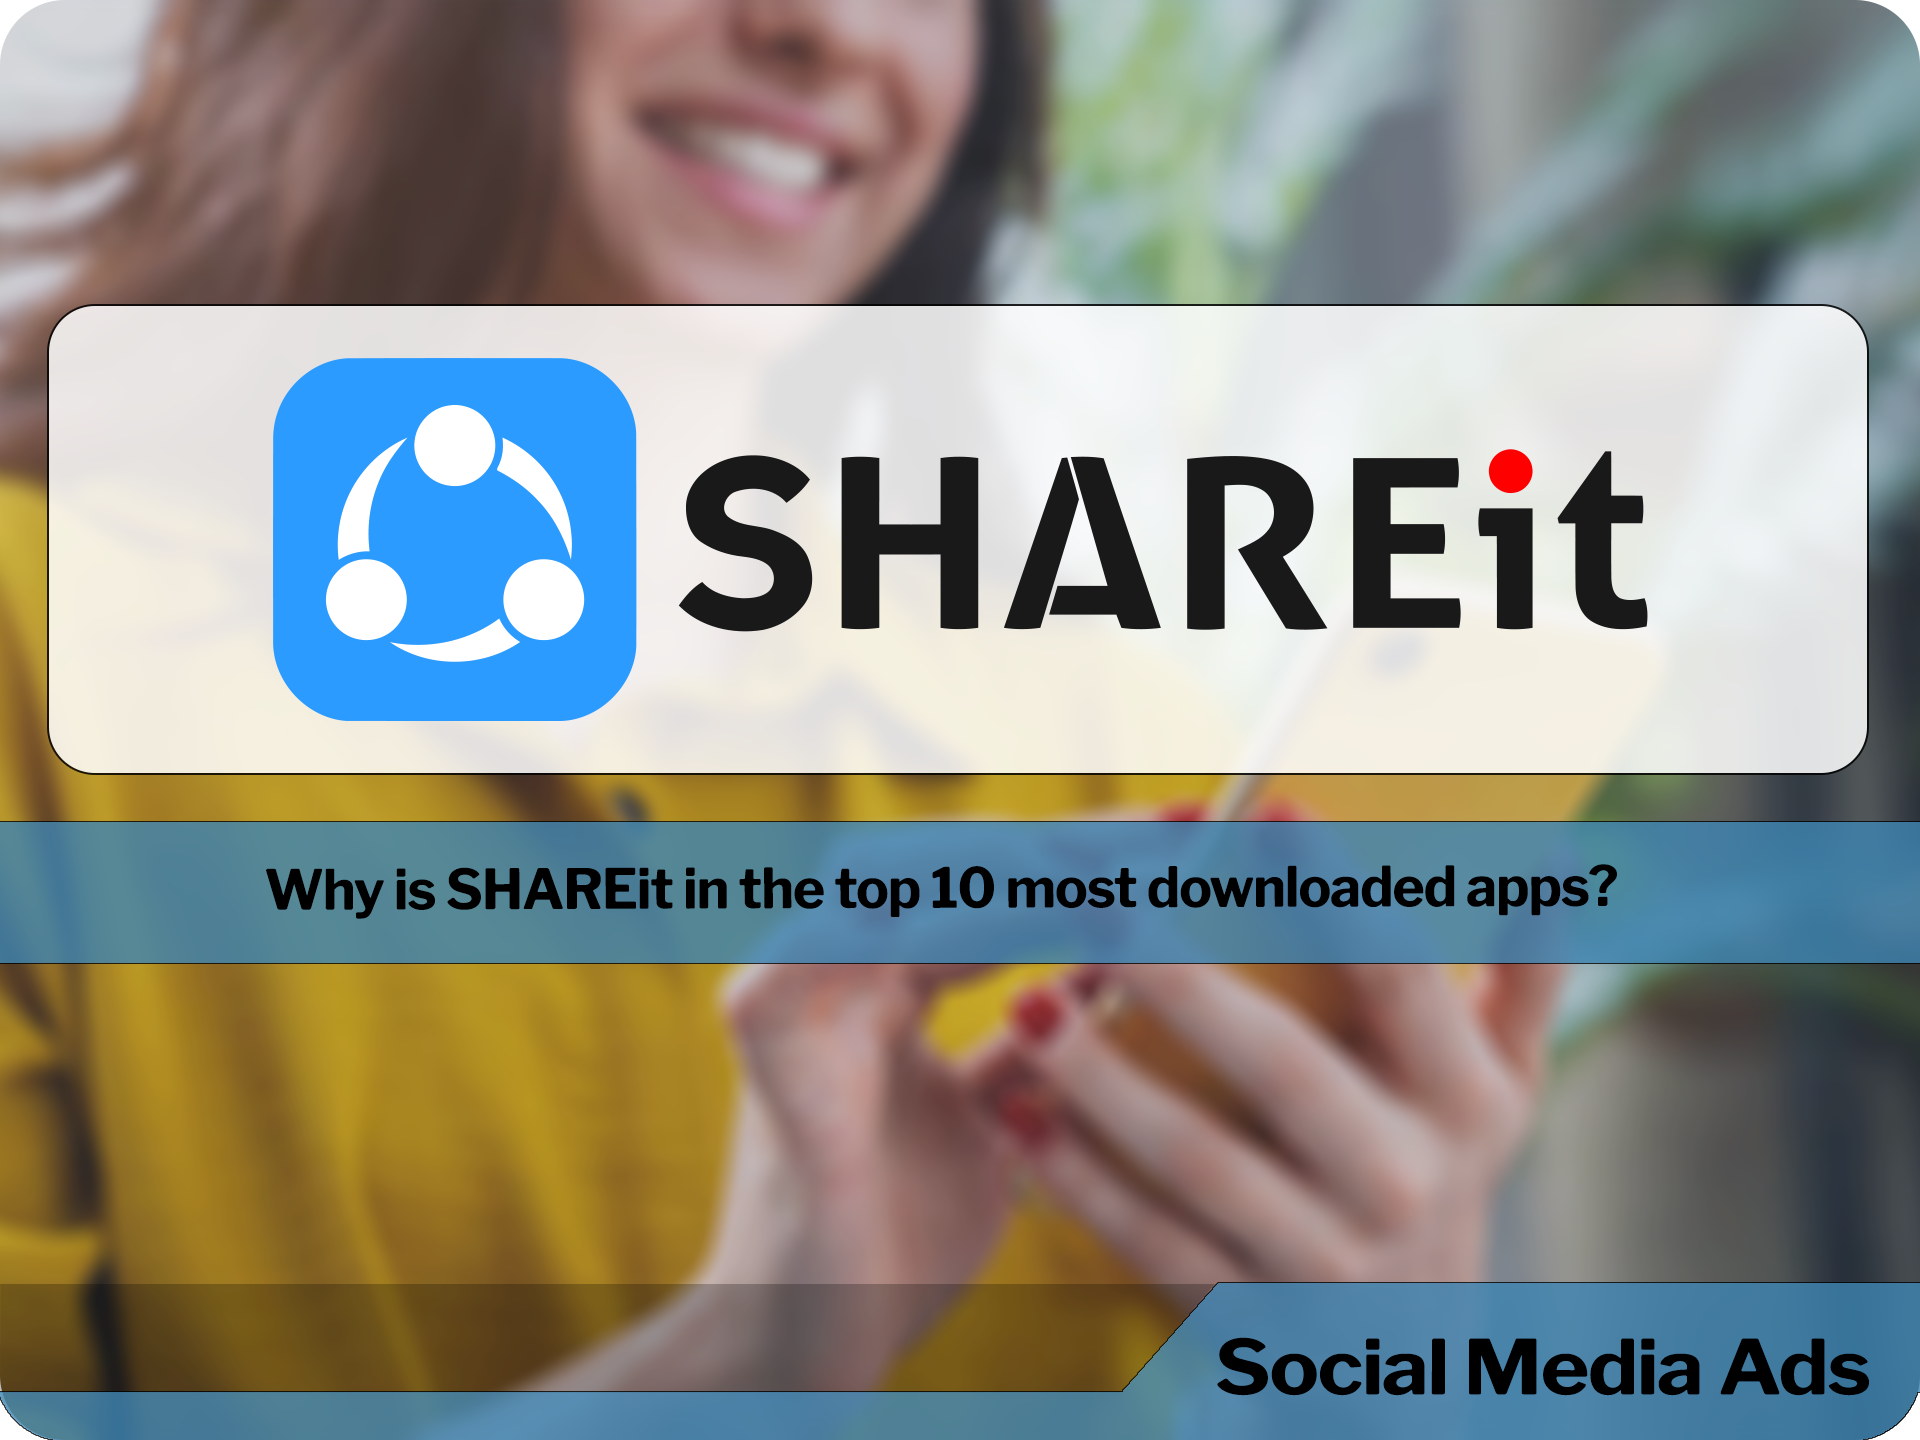 Why is SHAREit in the top 10 most downloaded apps?